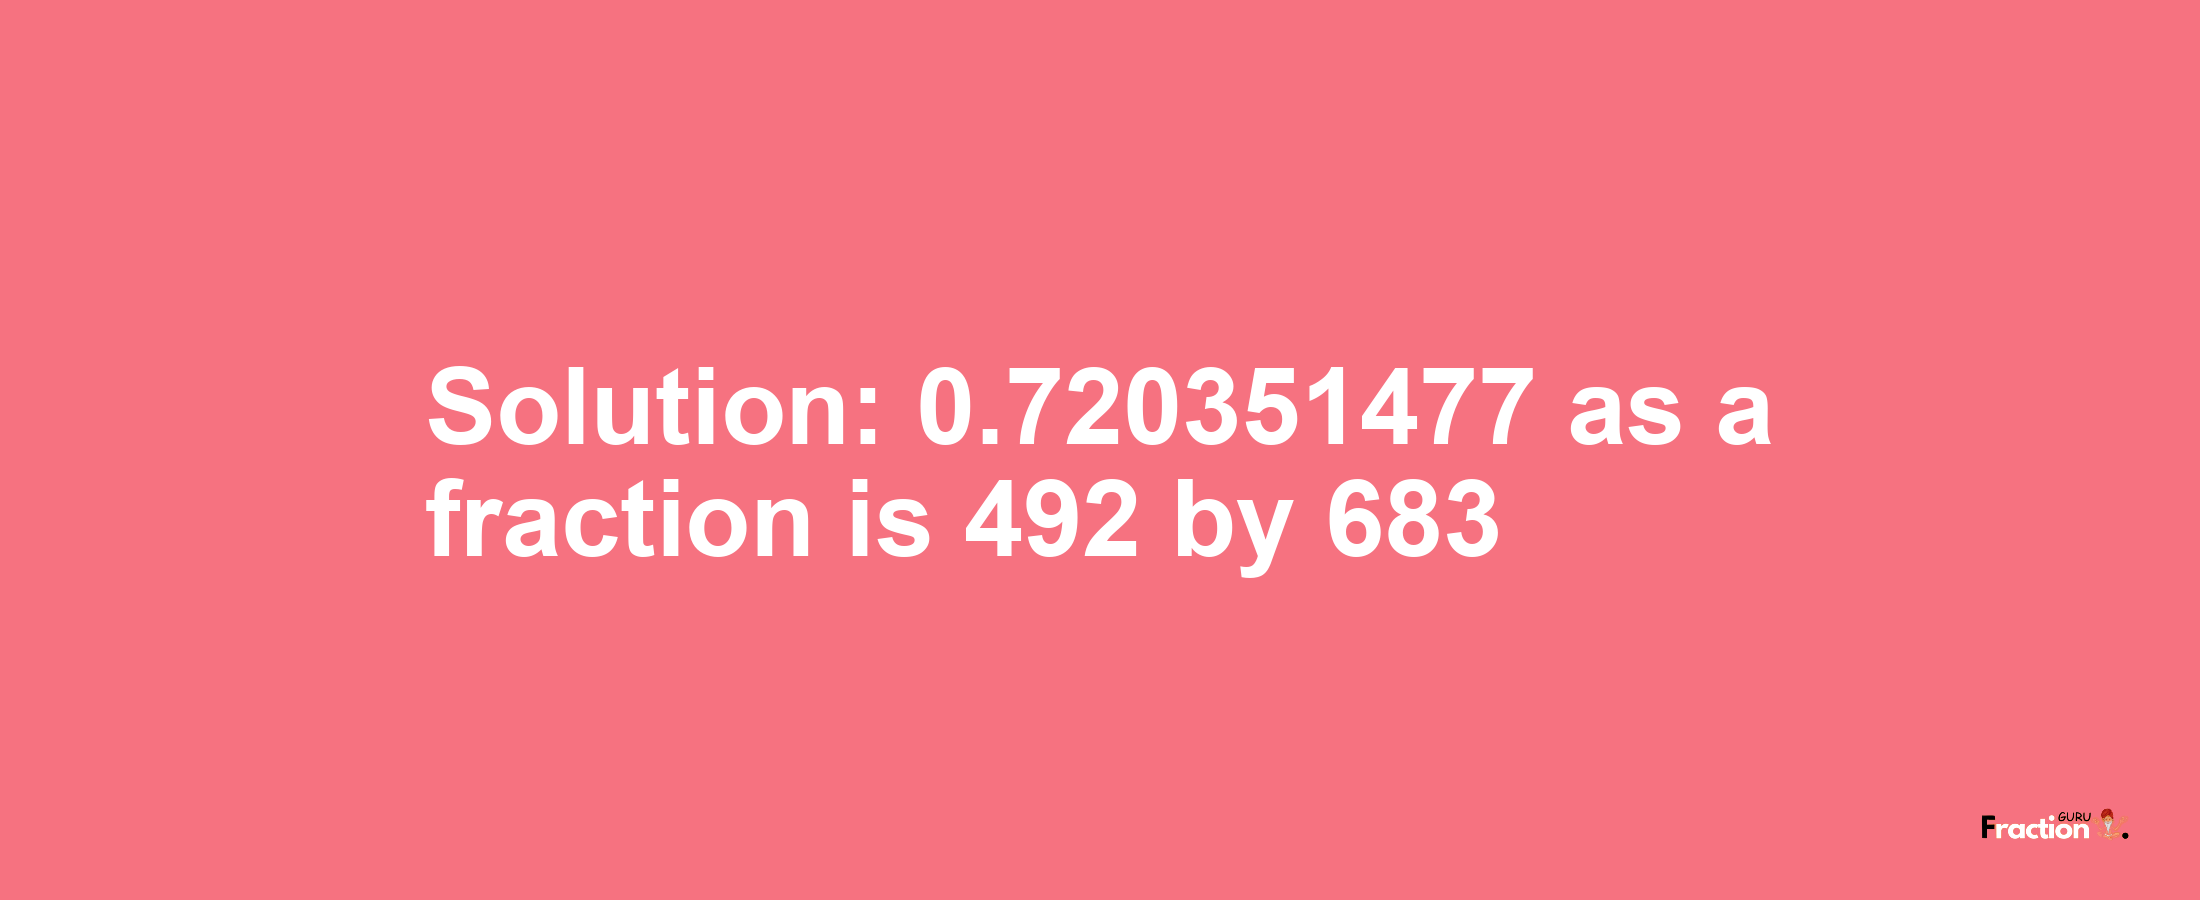 Solution:0.720351477 as a fraction is 492/683